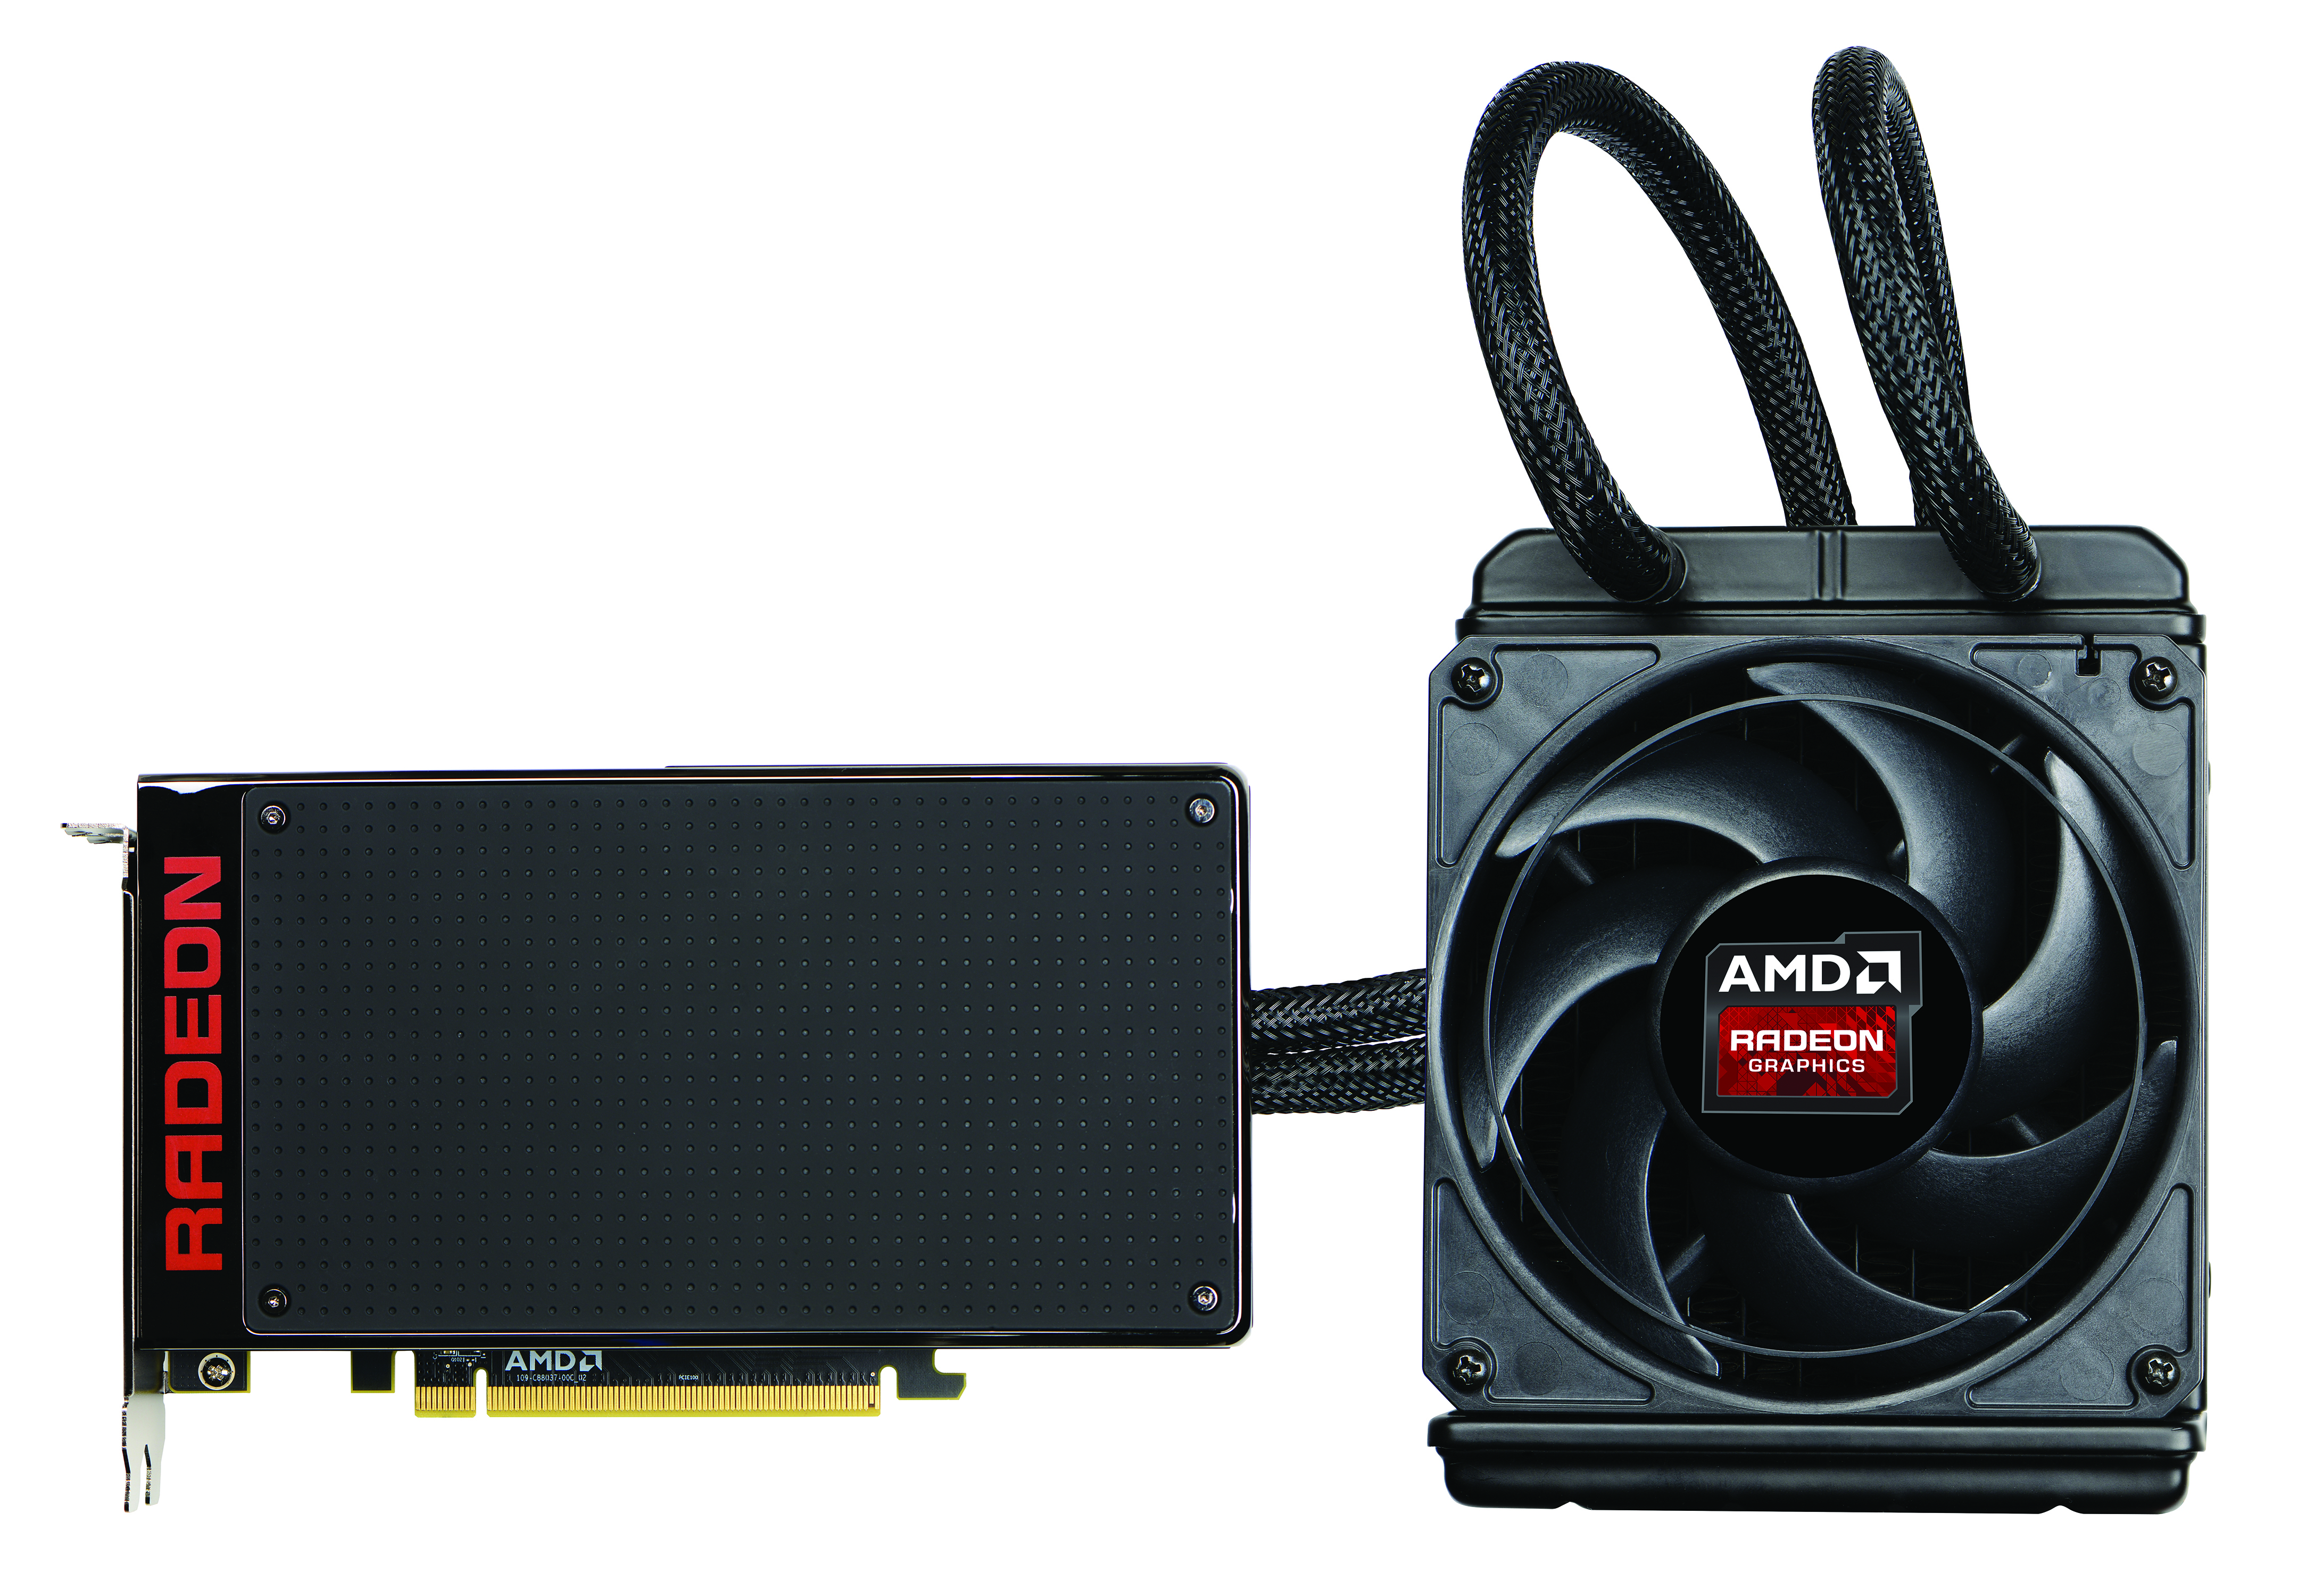 Meet The Radeon R9 Fury The AMD Radeon Fury X Review: Aiming For the Top